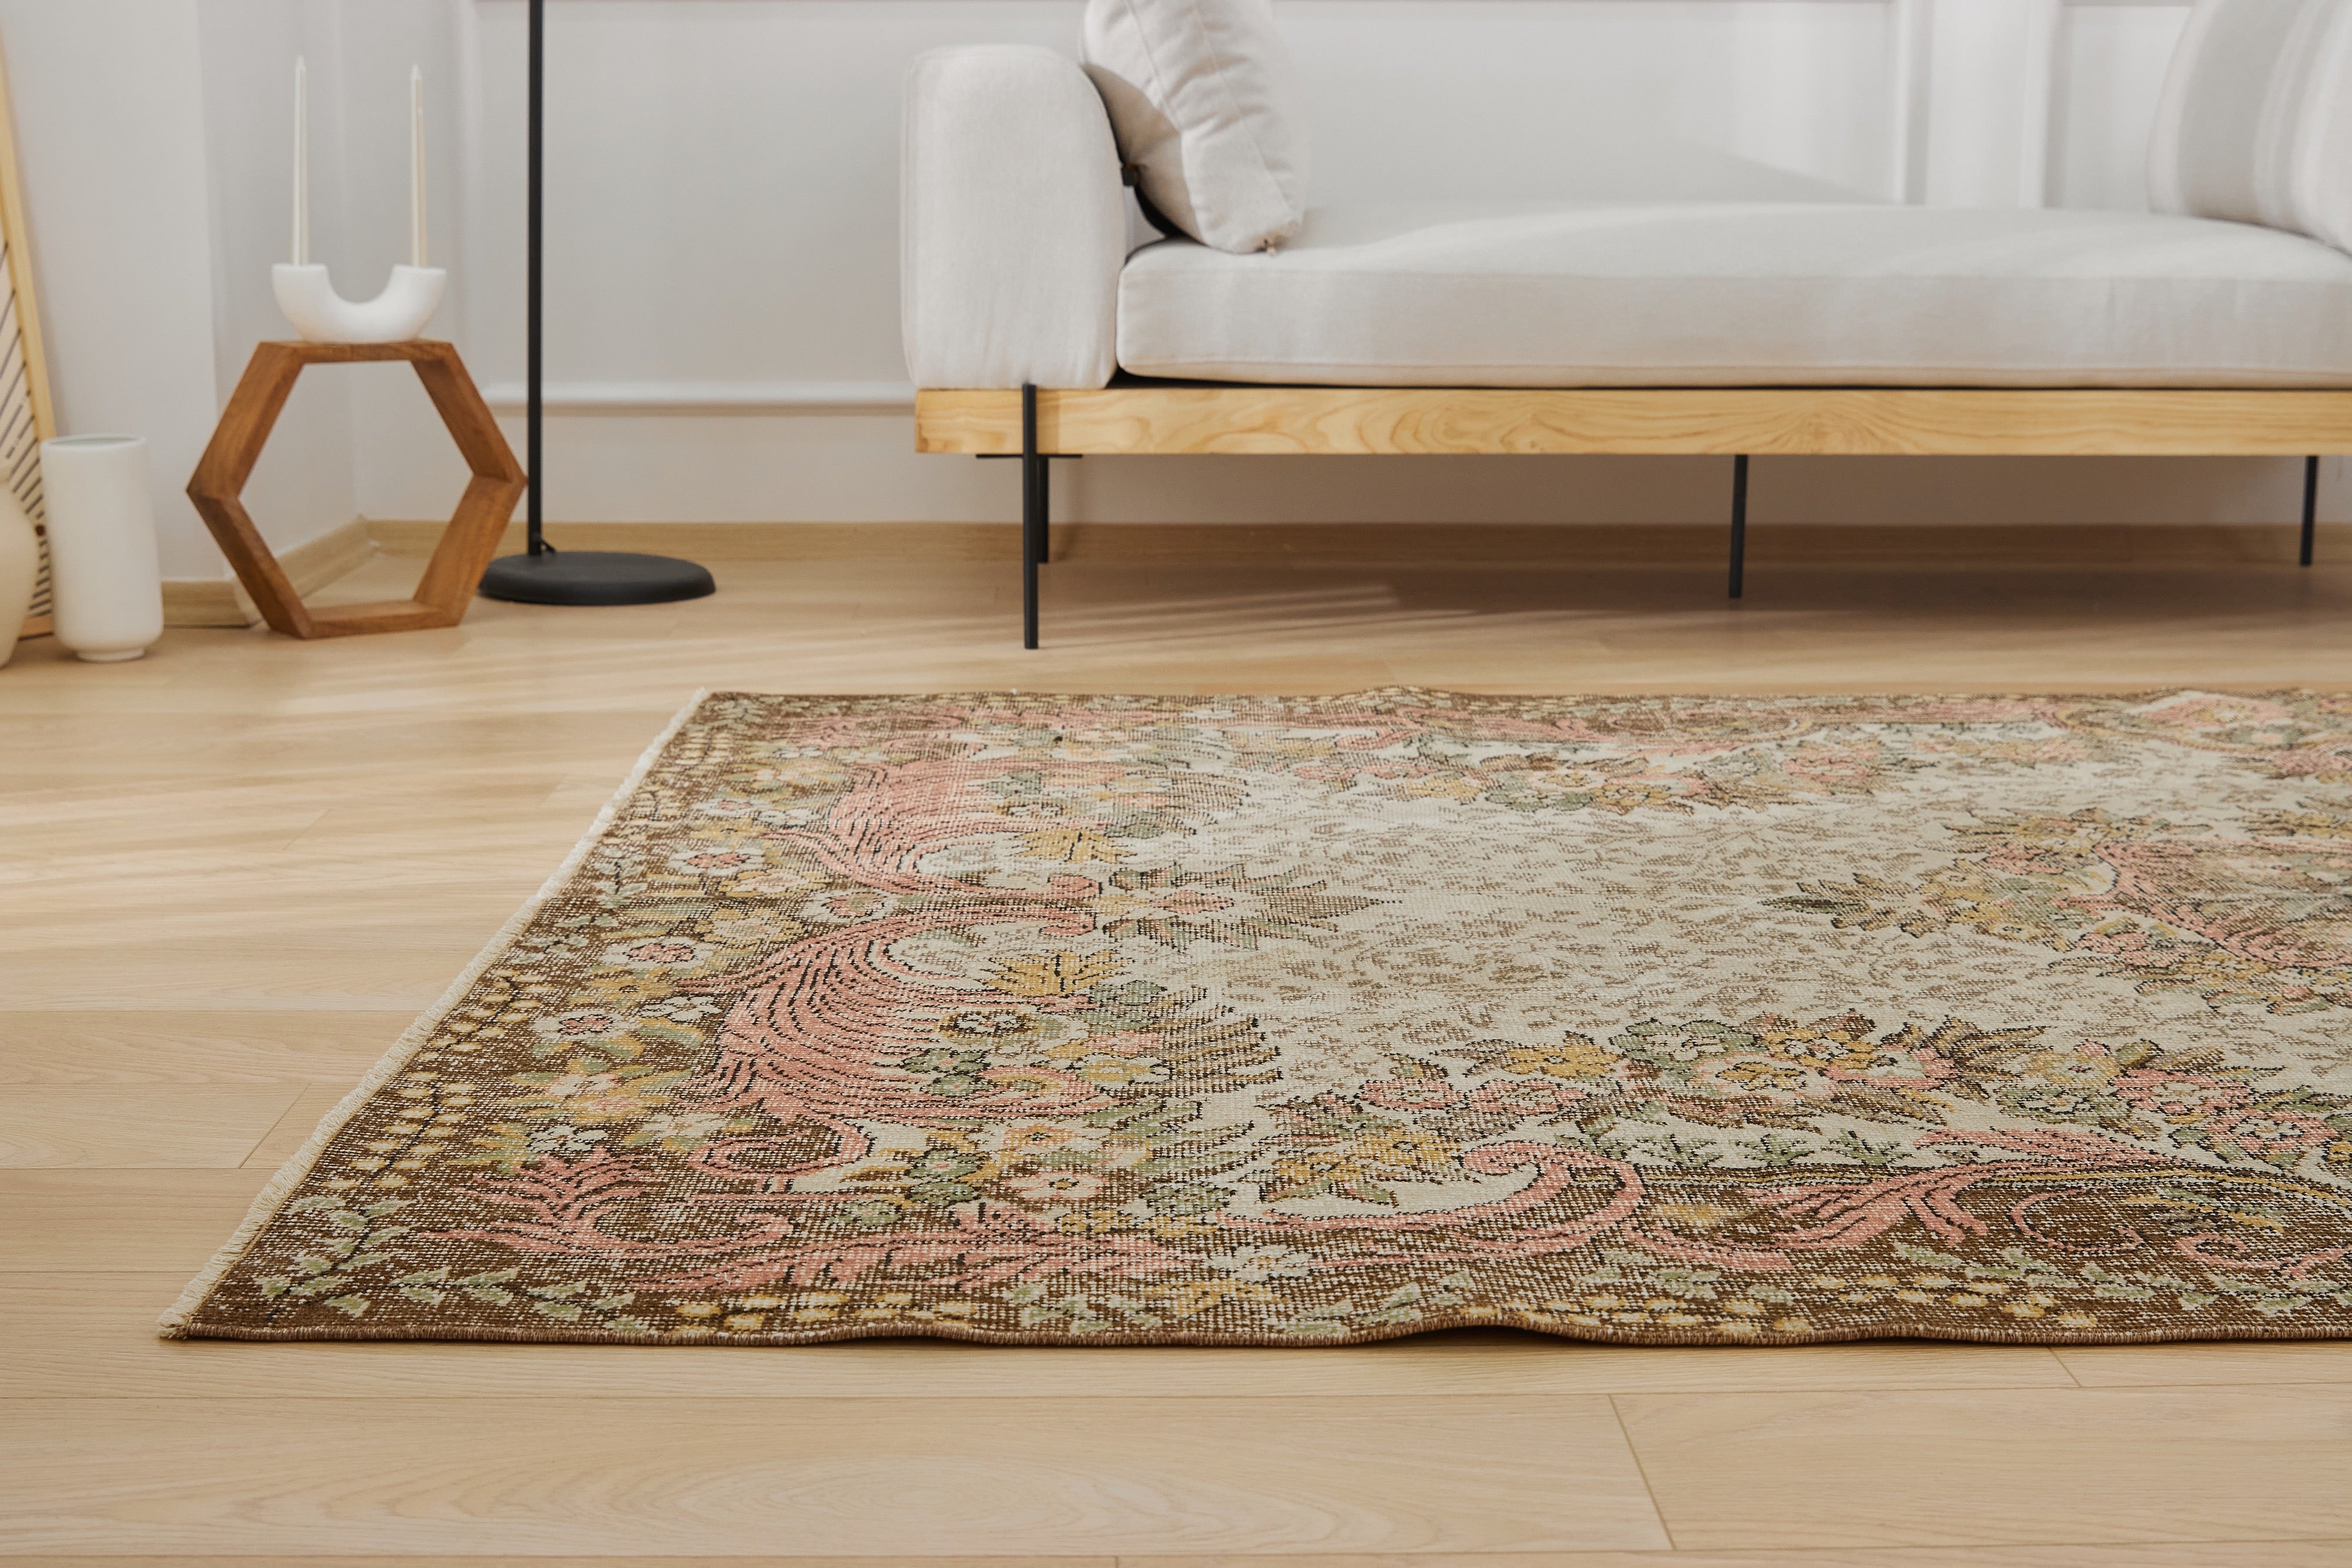 Metztli's Essence | Authentic Turkish Rug | Hand-Knotted Carpet | Kuden Rugs